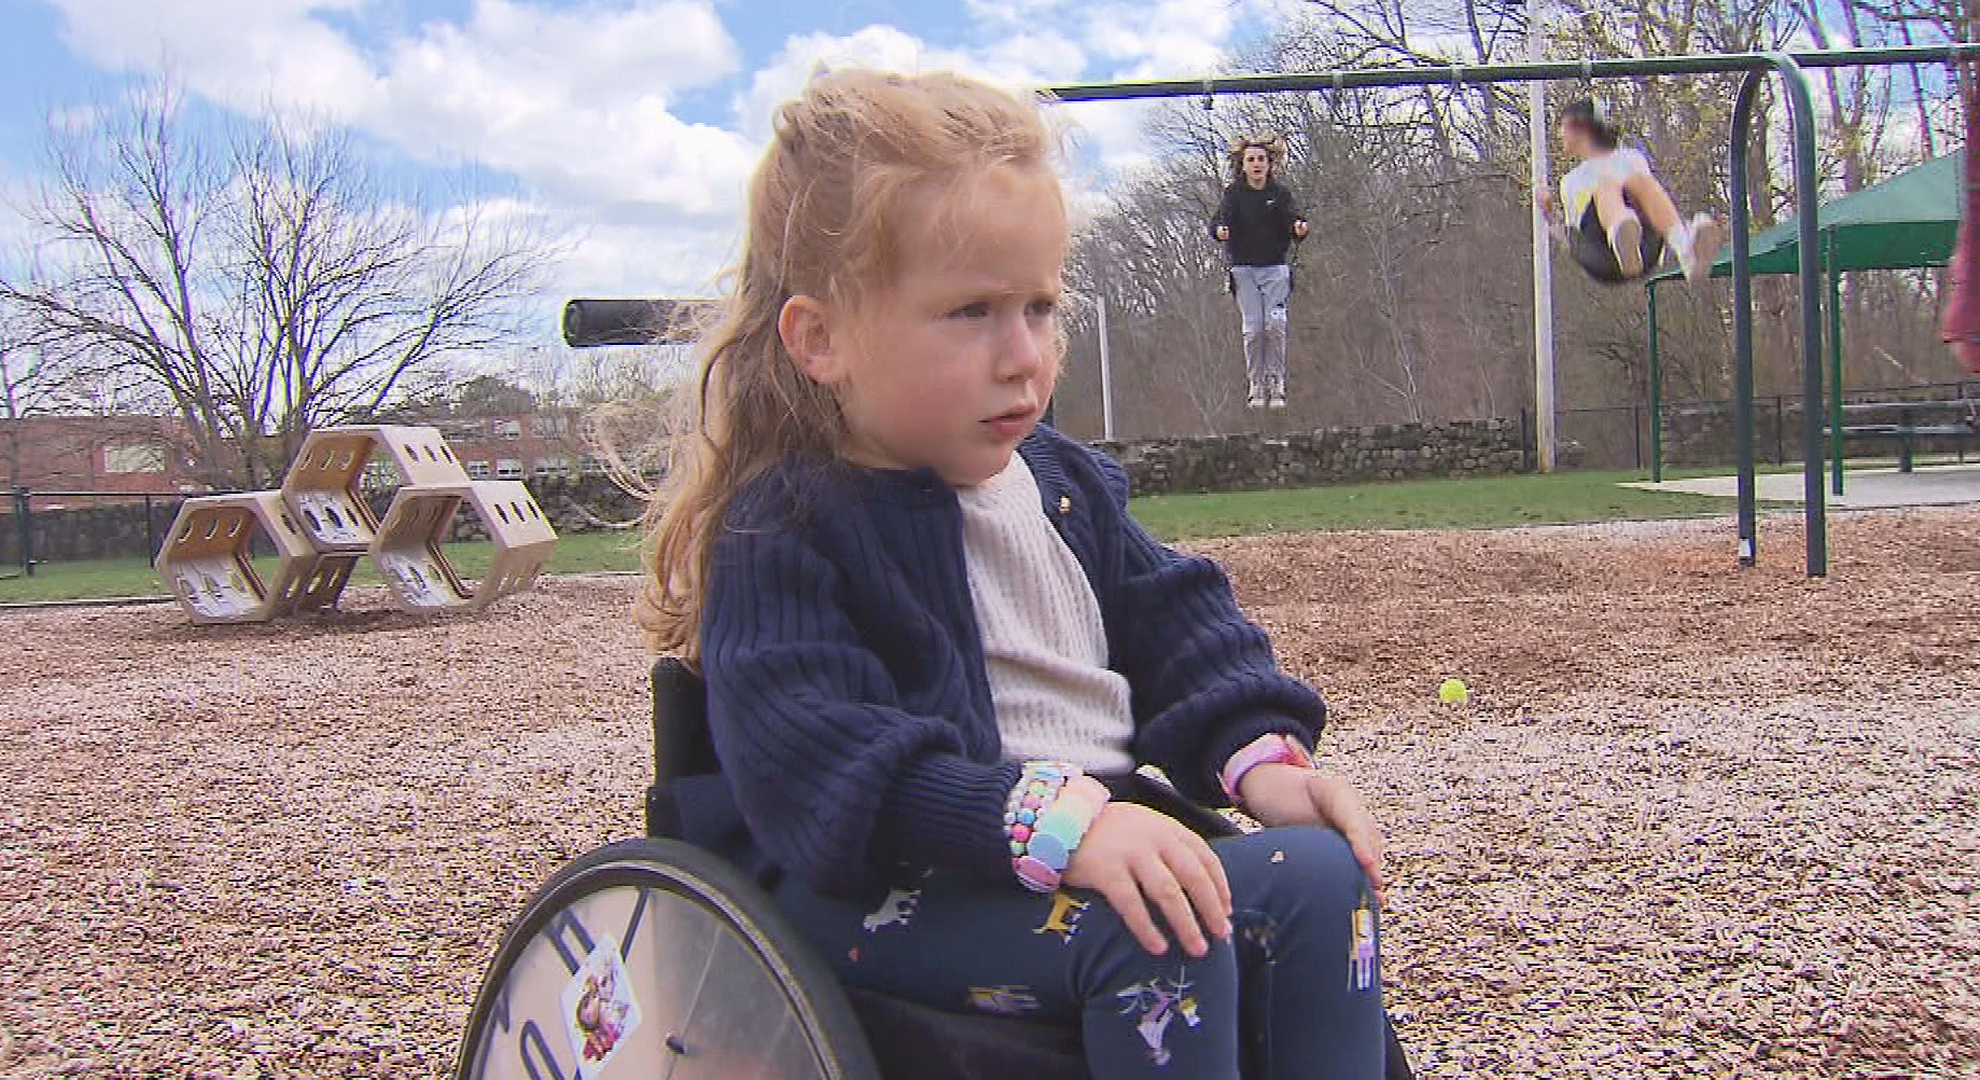 ‘A Moral Obligation’: Mansfield Family Wants Playground Accessible For All Kids